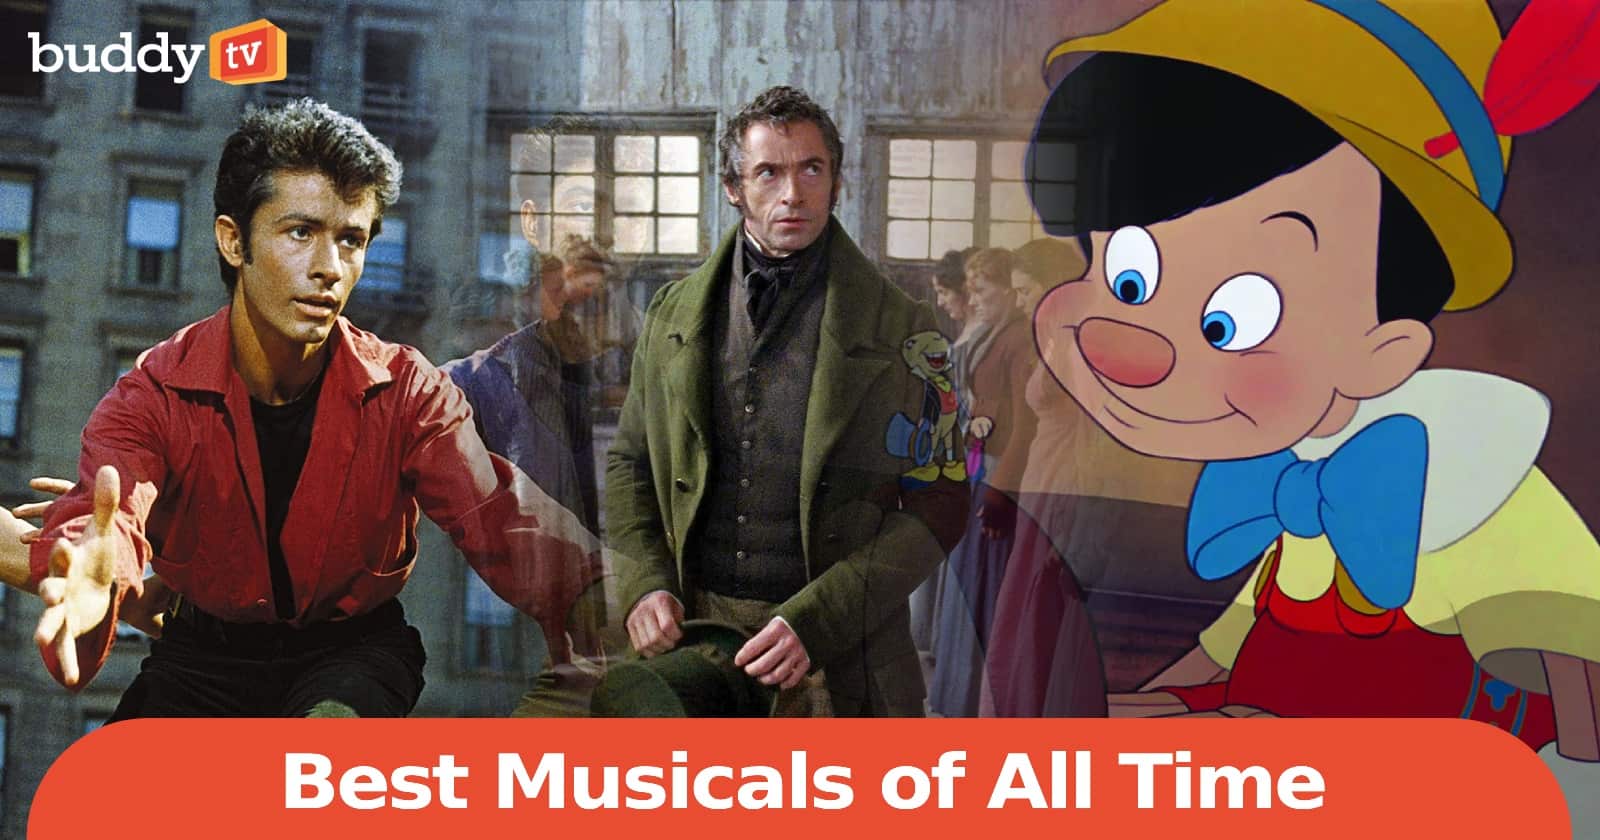 25 Best Musicals of All Time, Ranked by Viewers